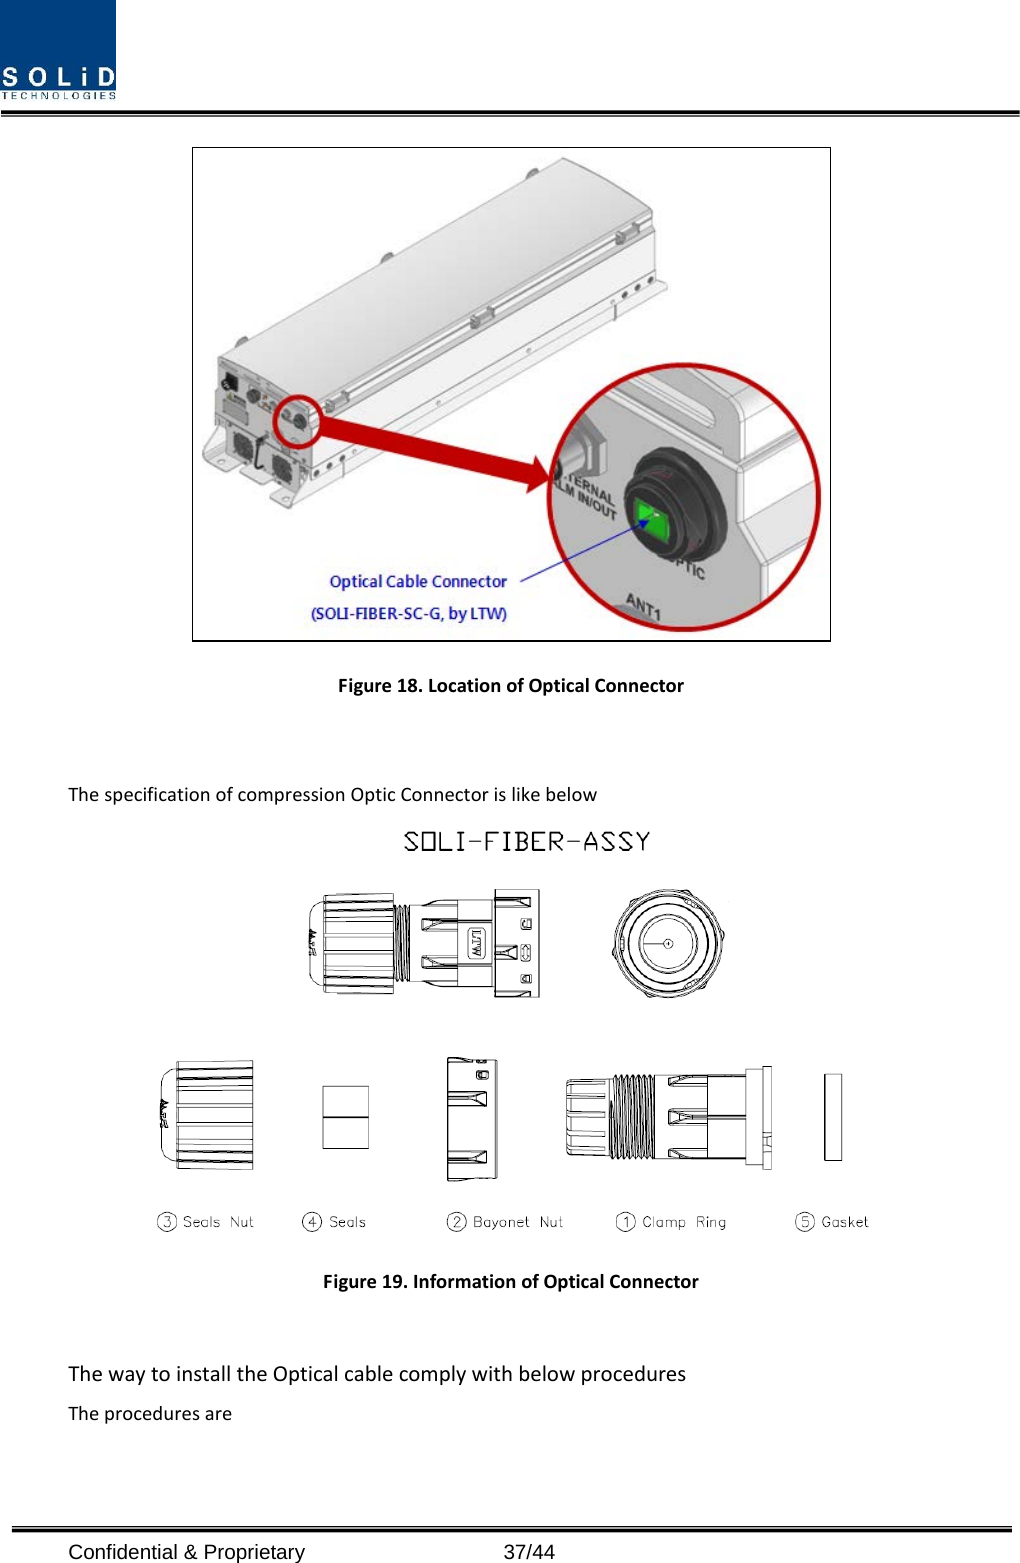   Figure 18. Location of Optical Connector  The specification of compression Optic Connector is like below   Figure 19. Information of Optical Connector  The way to install the Optical cable comply with below procedures The procedures are  Confidential &amp; Proprietary                   37/44 